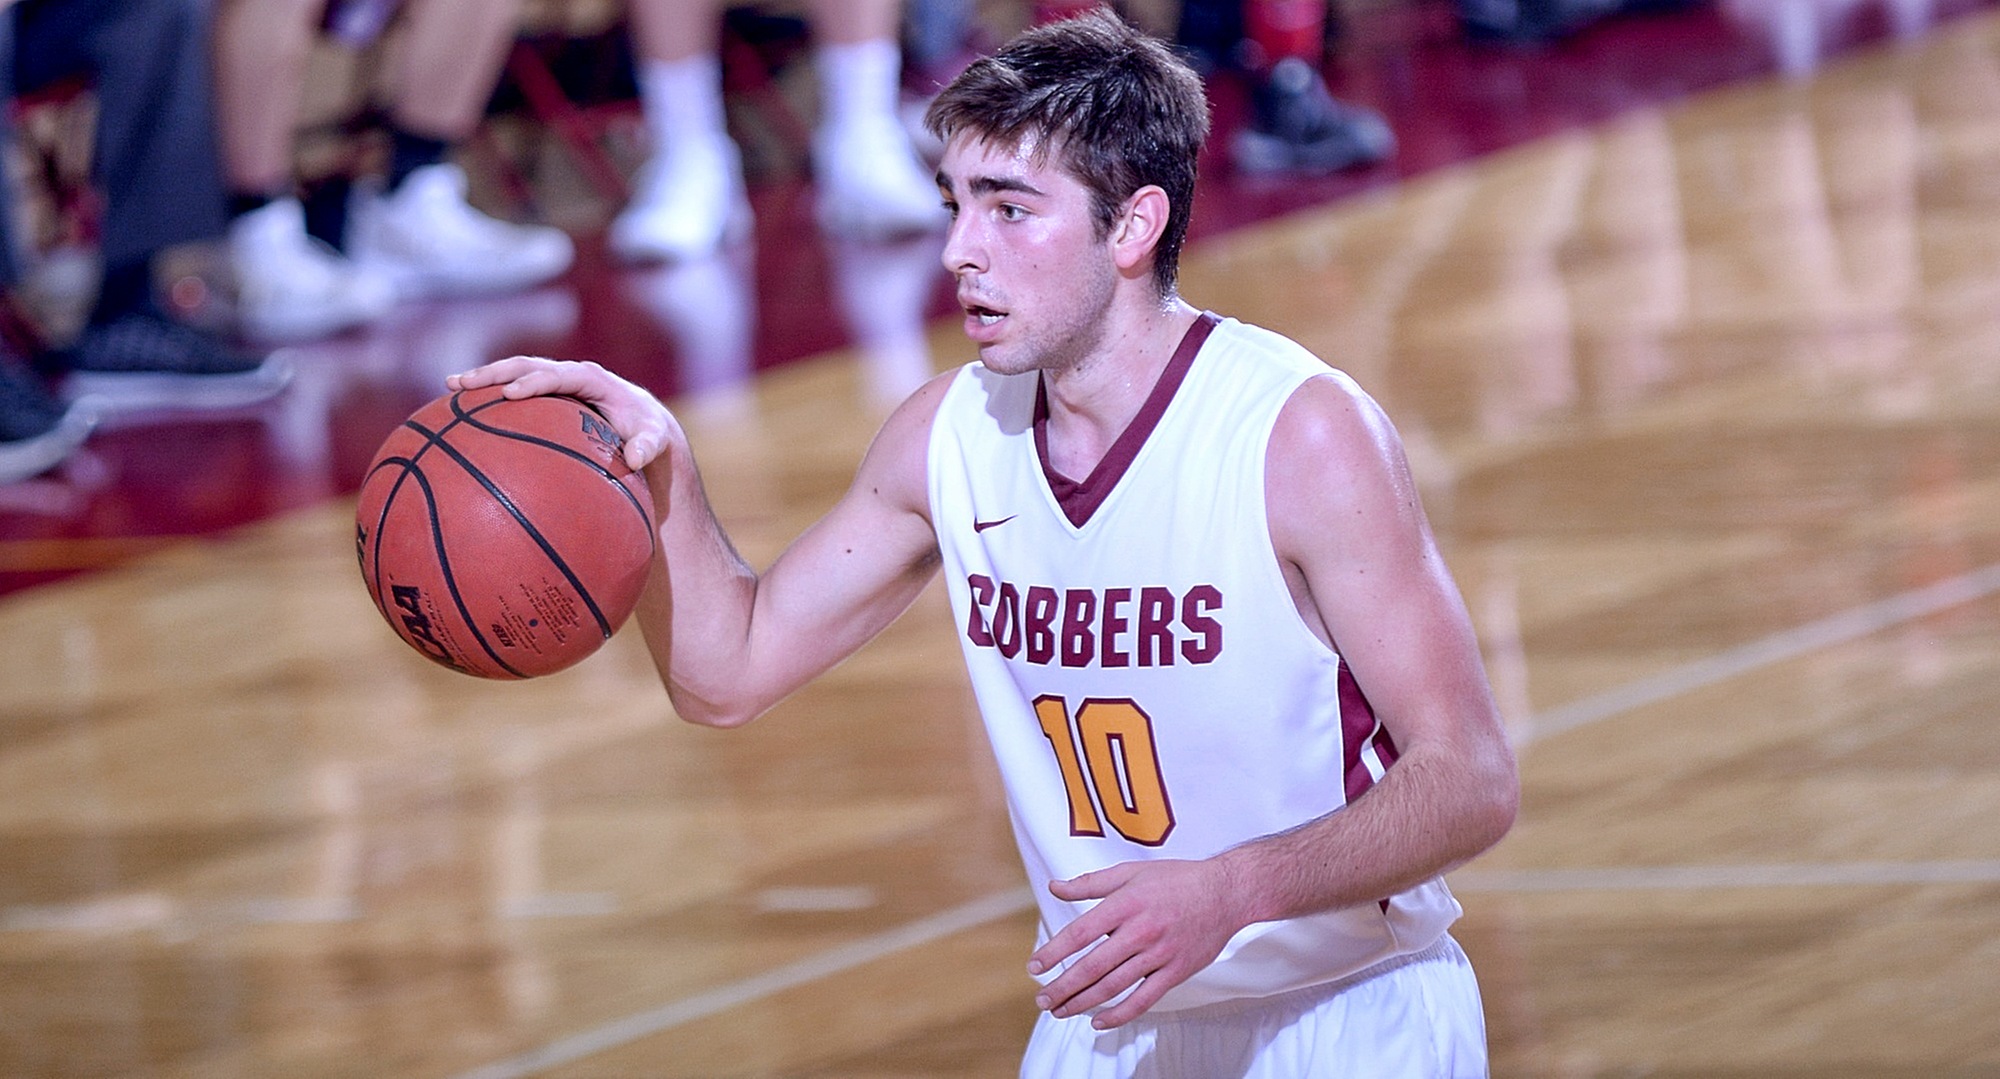 Junior Tommy Schyma had a team-high 17 points in the Cobbers' season opener at Minn.-Morris.